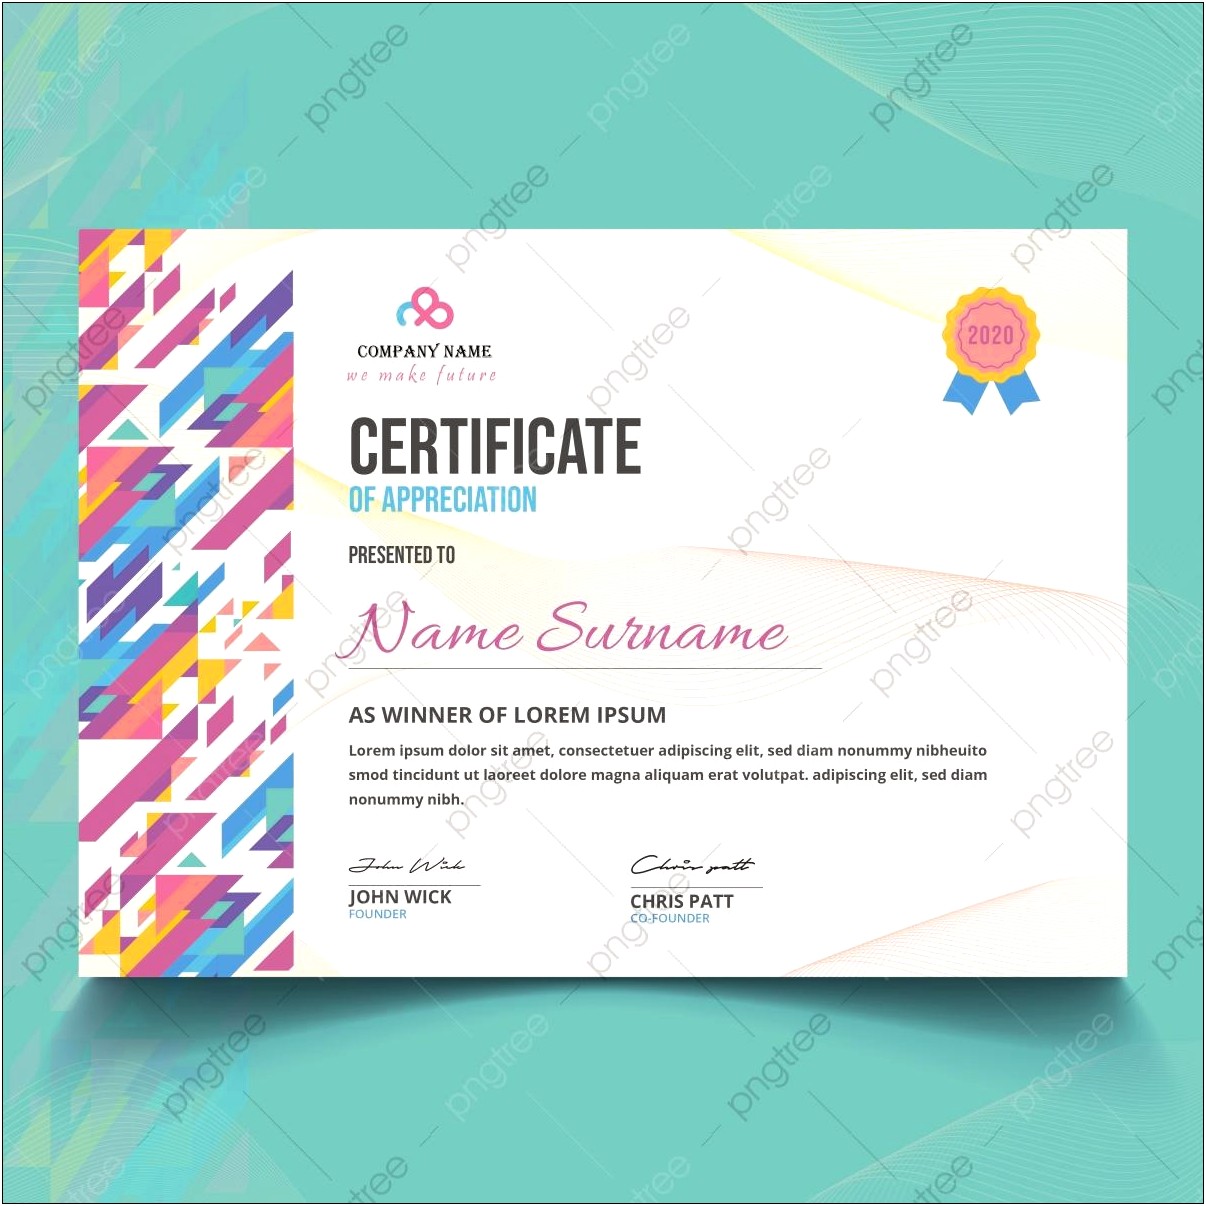 Creative Certificate Template Psd Free Download